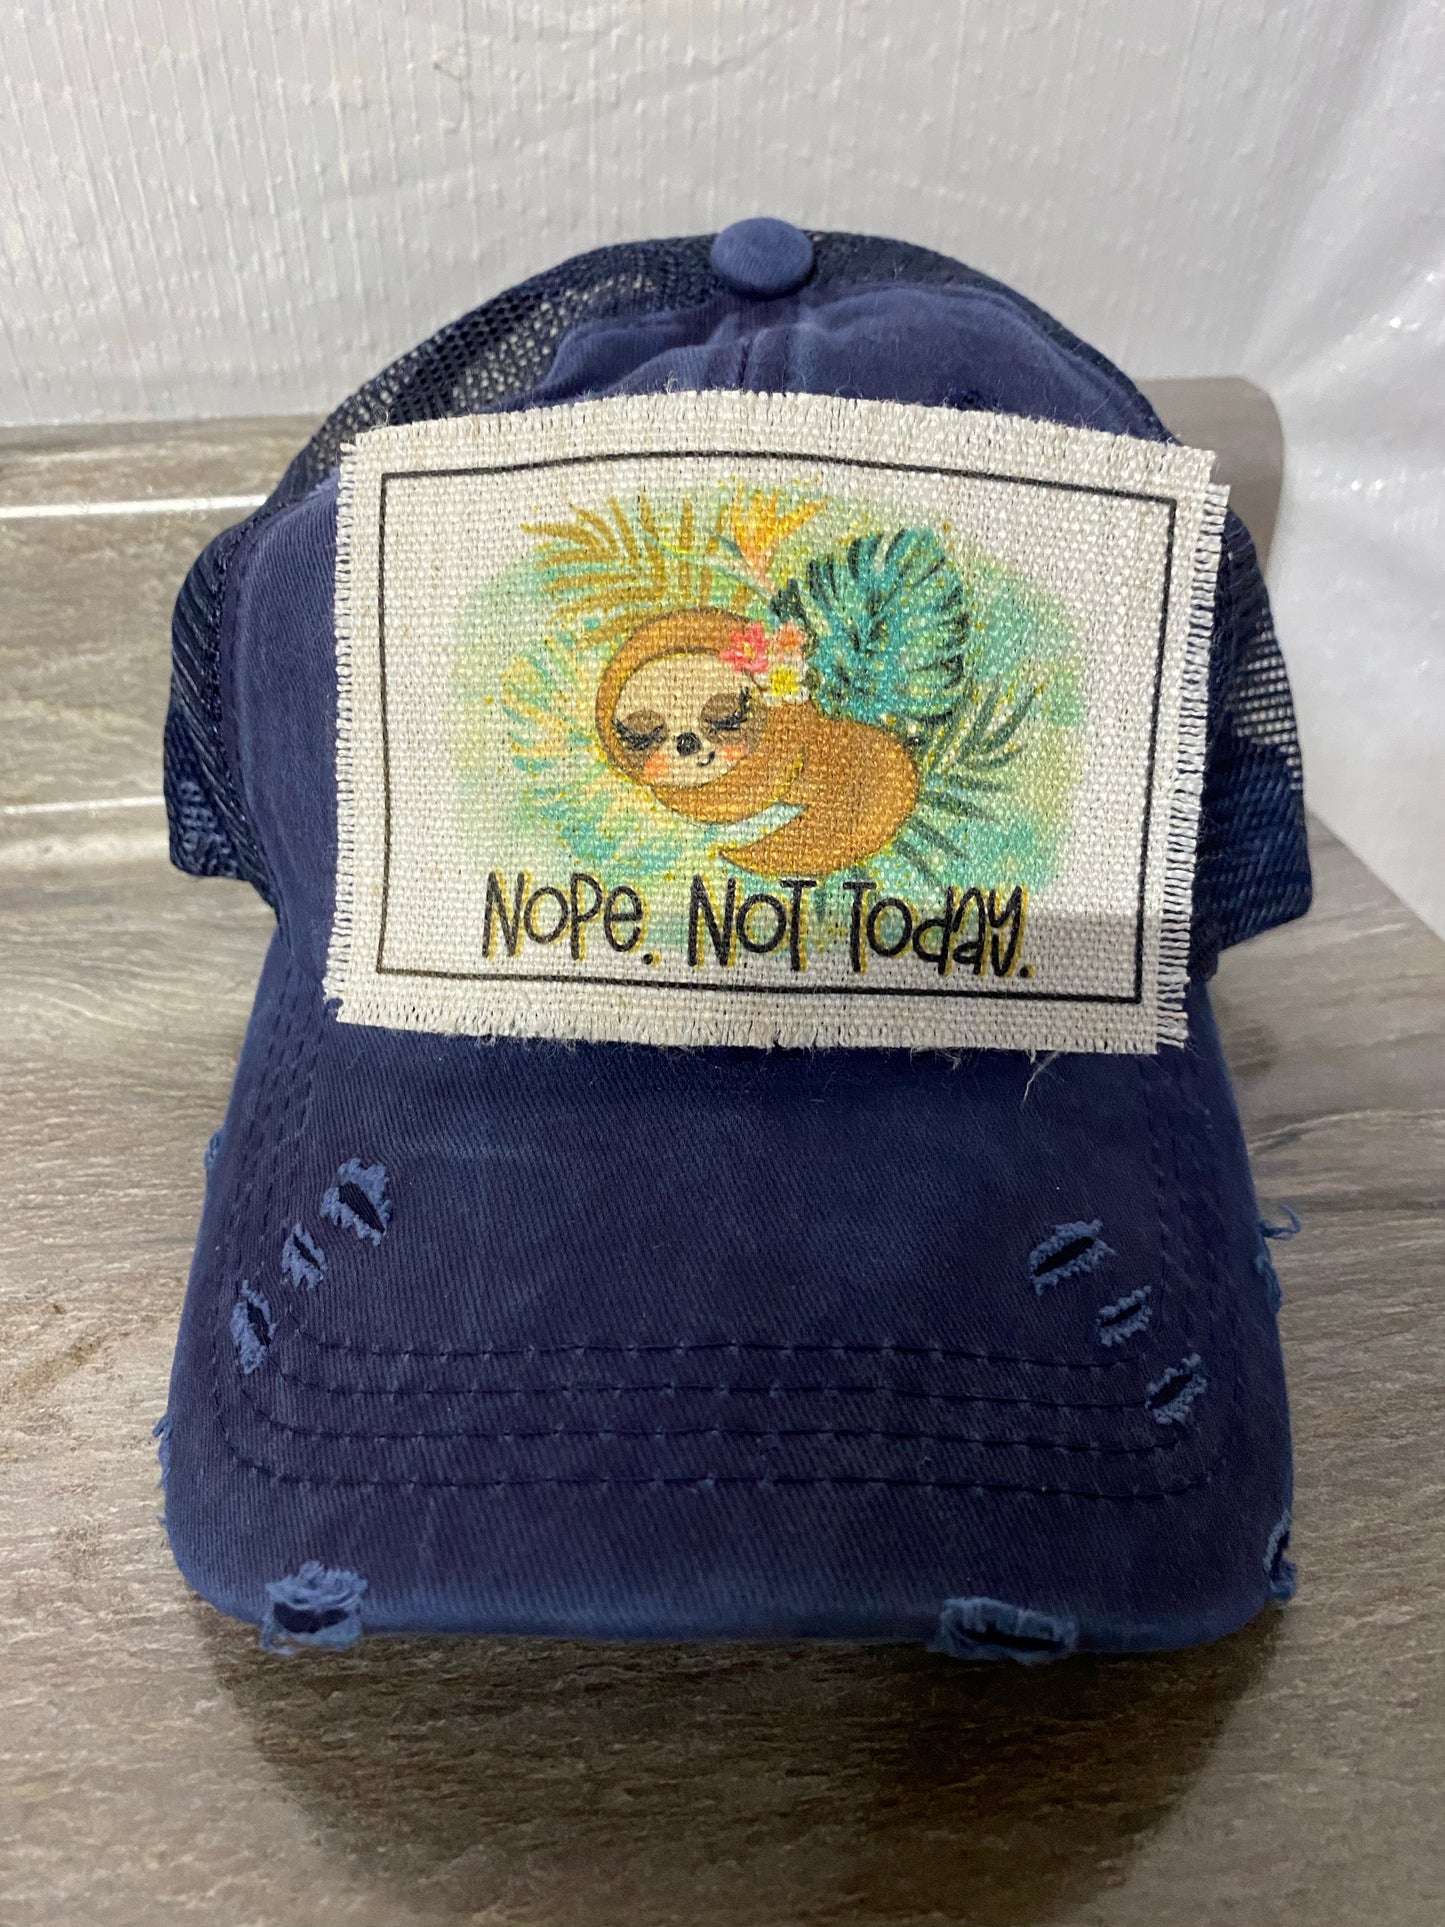 Nope, Not Today. Sloth Hat Patch